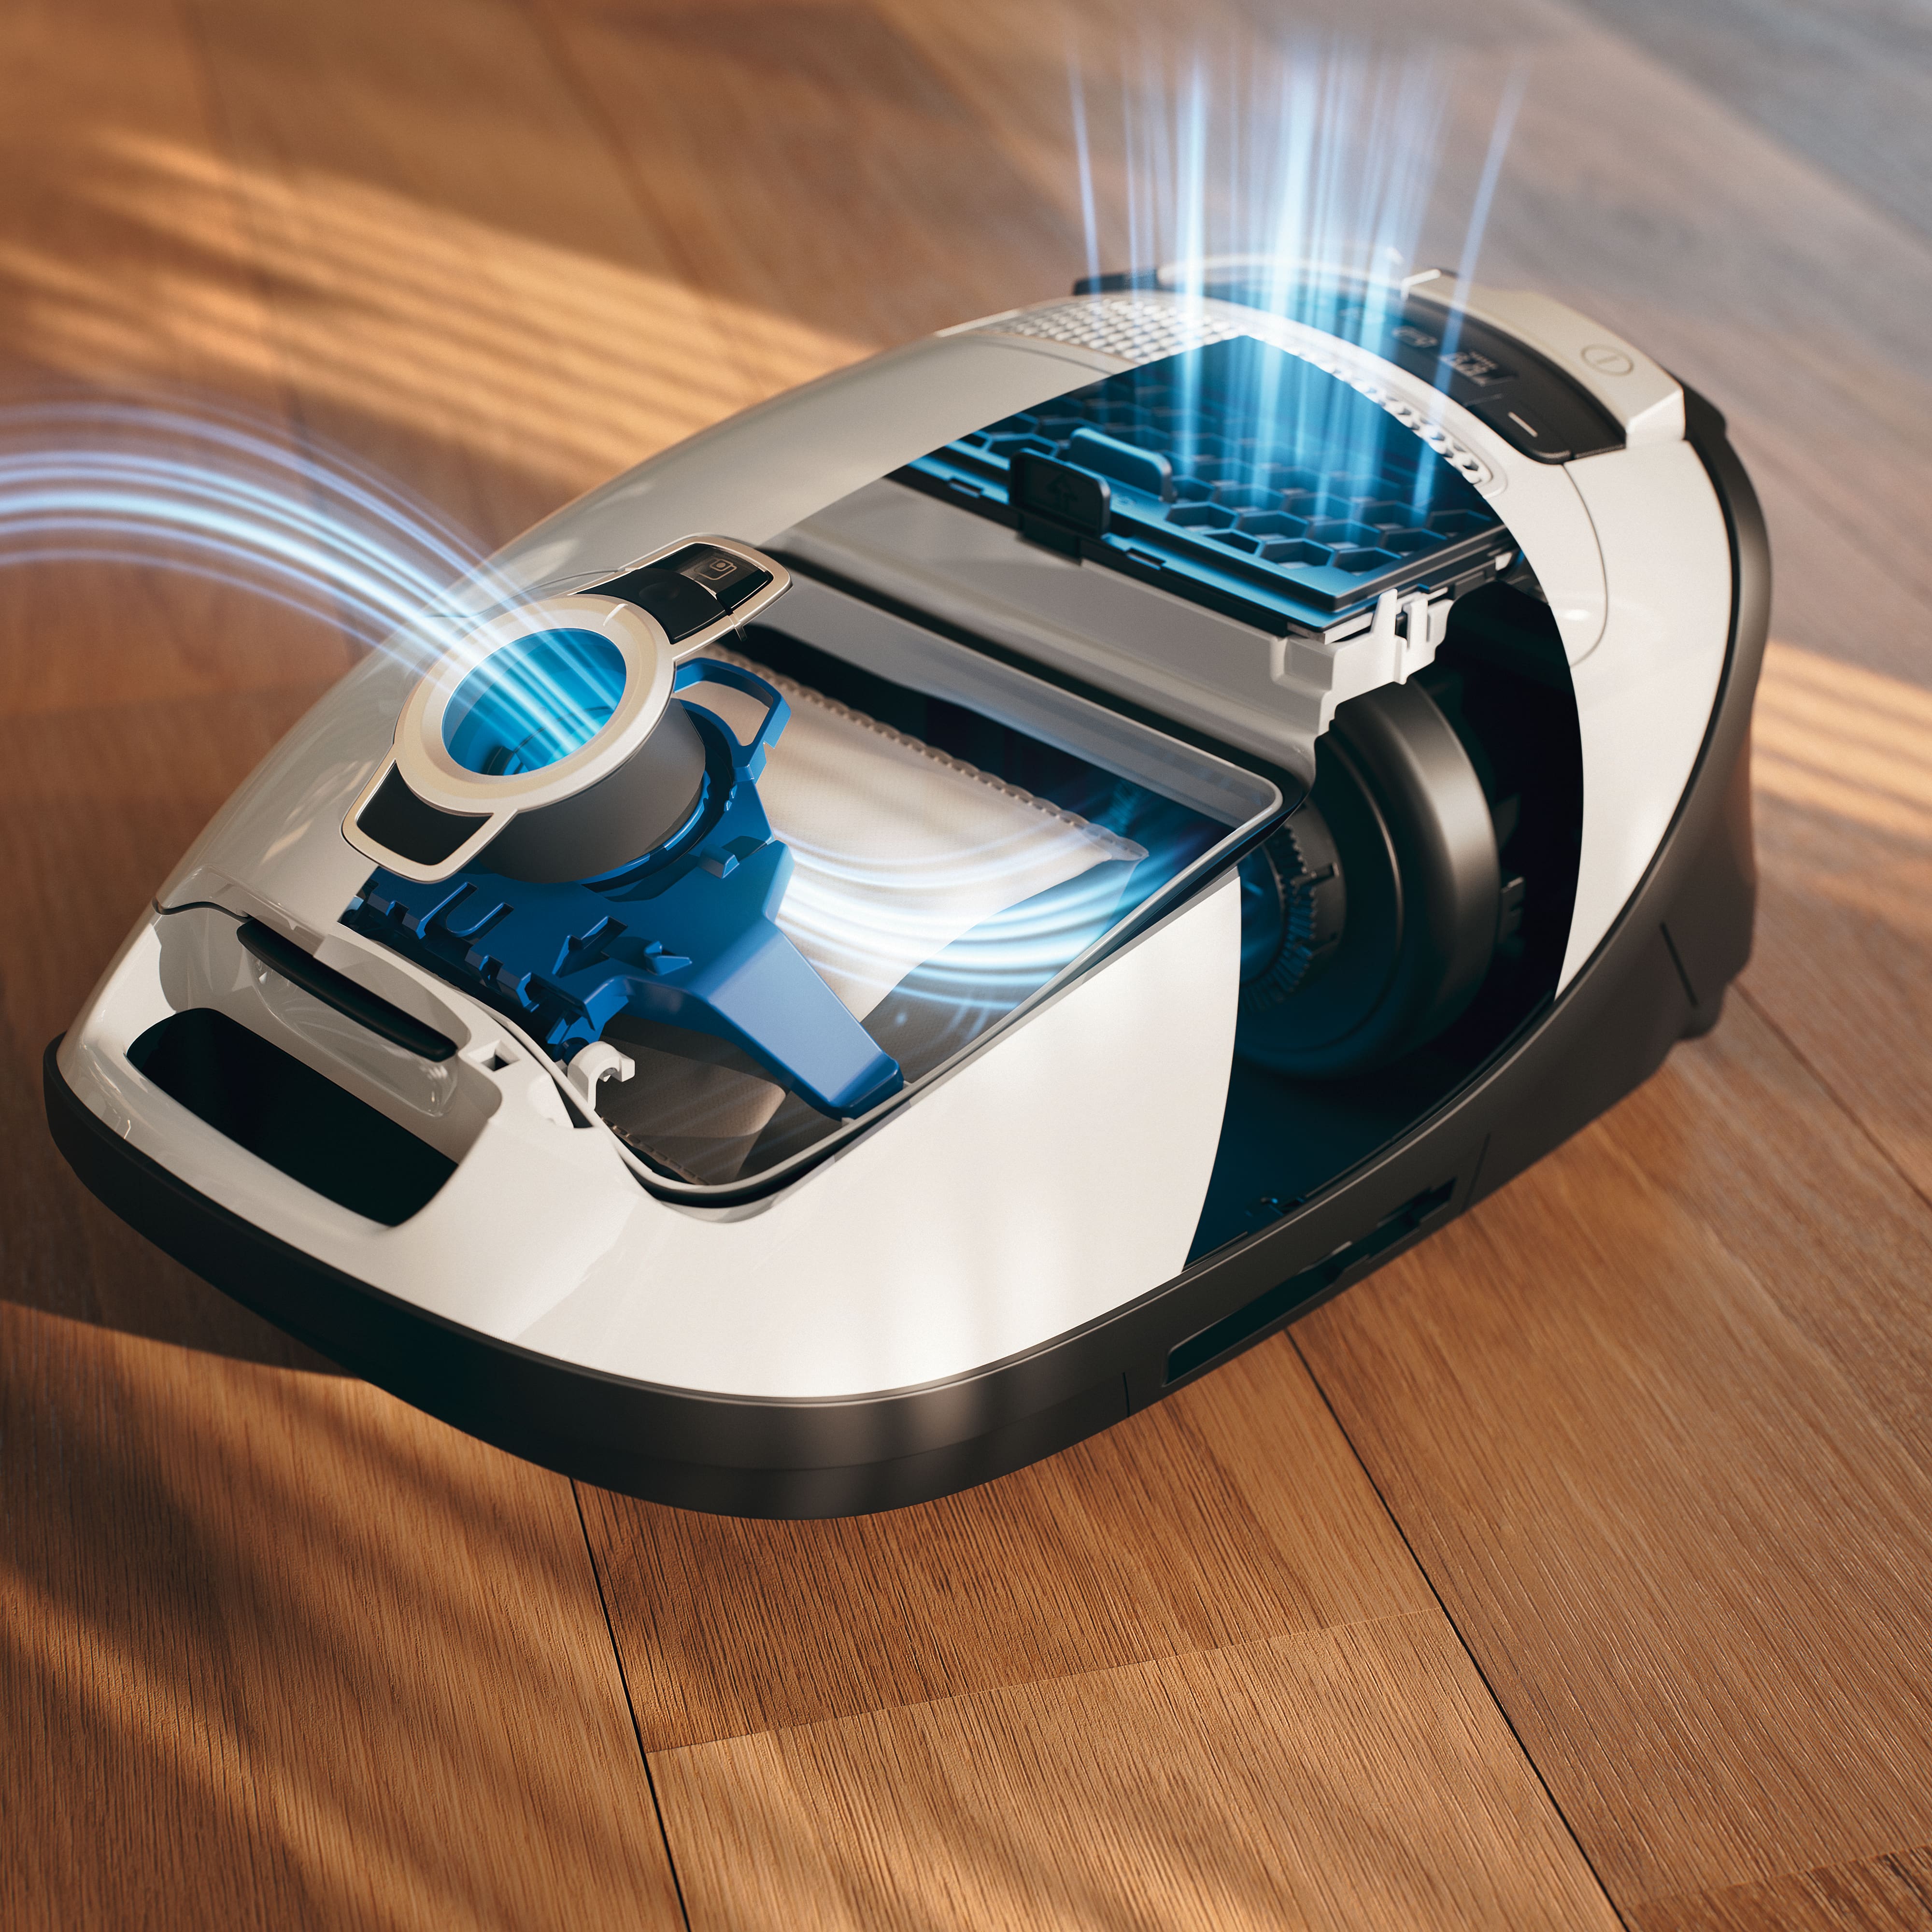 Miele - GN XL HyClean 3D – Vacuum cleaner accessories